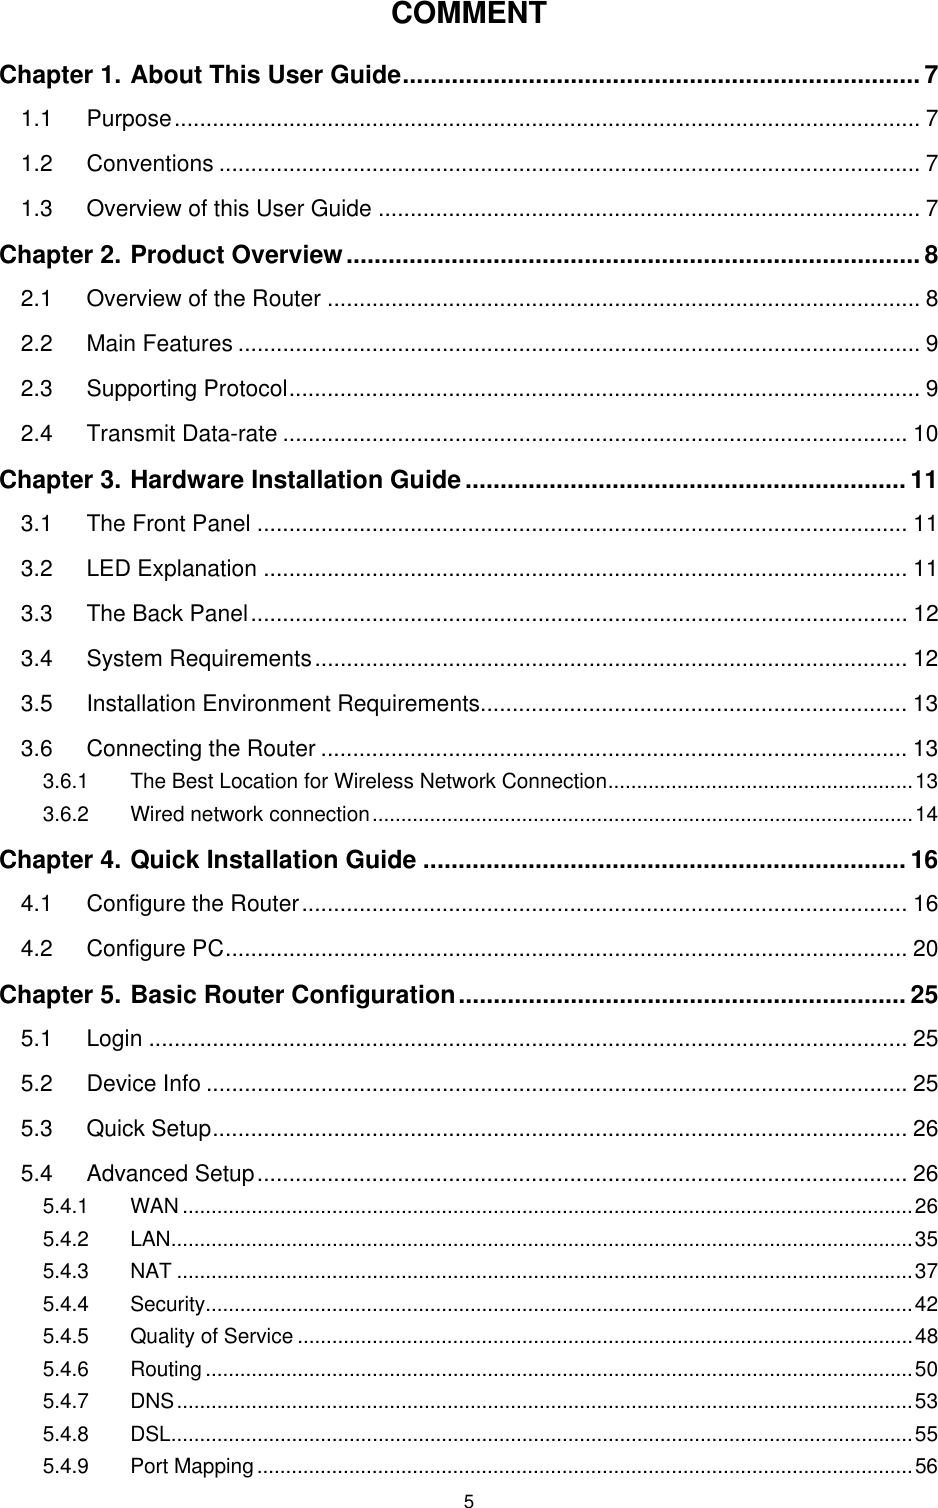   5COMMENT Chapter 1. About This User Guide.......................................................................... 7 1.1 Purpose..................................................................................................................... 7 1.2 Conventions .............................................................................................................. 7 1.3 Overview of this User Guide ..................................................................................... 7 Chapter 2. Product Overview.................................................................................. 8 2.1 Overview of the Router ............................................................................................. 8 2.2 Main Features ........................................................................................................... 9 2.3 Supporting Protocol................................................................................................... 9 2.4 Transmit Data-rate .................................................................................................. 10 Chapter 3. Hardware Installation Guide............................................................... 11 3.1 The Front Panel ...................................................................................................... 11 3.2 LED Explanation ..................................................................................................... 11 3.3 The Back Panel....................................................................................................... 12 3.4 System Requirements............................................................................................. 12 3.5 Installation Environment Requirements................................................................... 13 3.6 Connecting the Router ............................................................................................ 13 3.6.1 The Best Location for Wireless Network Connection.....................................................13 3.6.2 Wired network connection..............................................................................................14 Chapter 4. Quick Installation Guide ..................................................................... 16 4.1 Configure the Router............................................................................................... 16 4.2 Configure PC........................................................................................................... 20 Chapter 5. Basic Router Configuration................................................................ 25 5.1 Login ....................................................................................................................... 25 5.2 Device Info .............................................................................................................. 25 5.3 Quick Setup............................................................................................................. 26 5.4 Advanced Setup...................................................................................................... 26 5.4.1 WAN ...............................................................................................................................26 5.4.2 LAN.................................................................................................................................35 5.4.3 NAT ................................................................................................................................37 5.4.4 Security...........................................................................................................................42 5.4.5 Quality of Service ...........................................................................................................48 5.4.6 Routing ...........................................................................................................................50 5.4.7 DNS................................................................................................................................53 5.4.8 DSL.................................................................................................................................55 5.4.9 Port Mapping..................................................................................................................56 